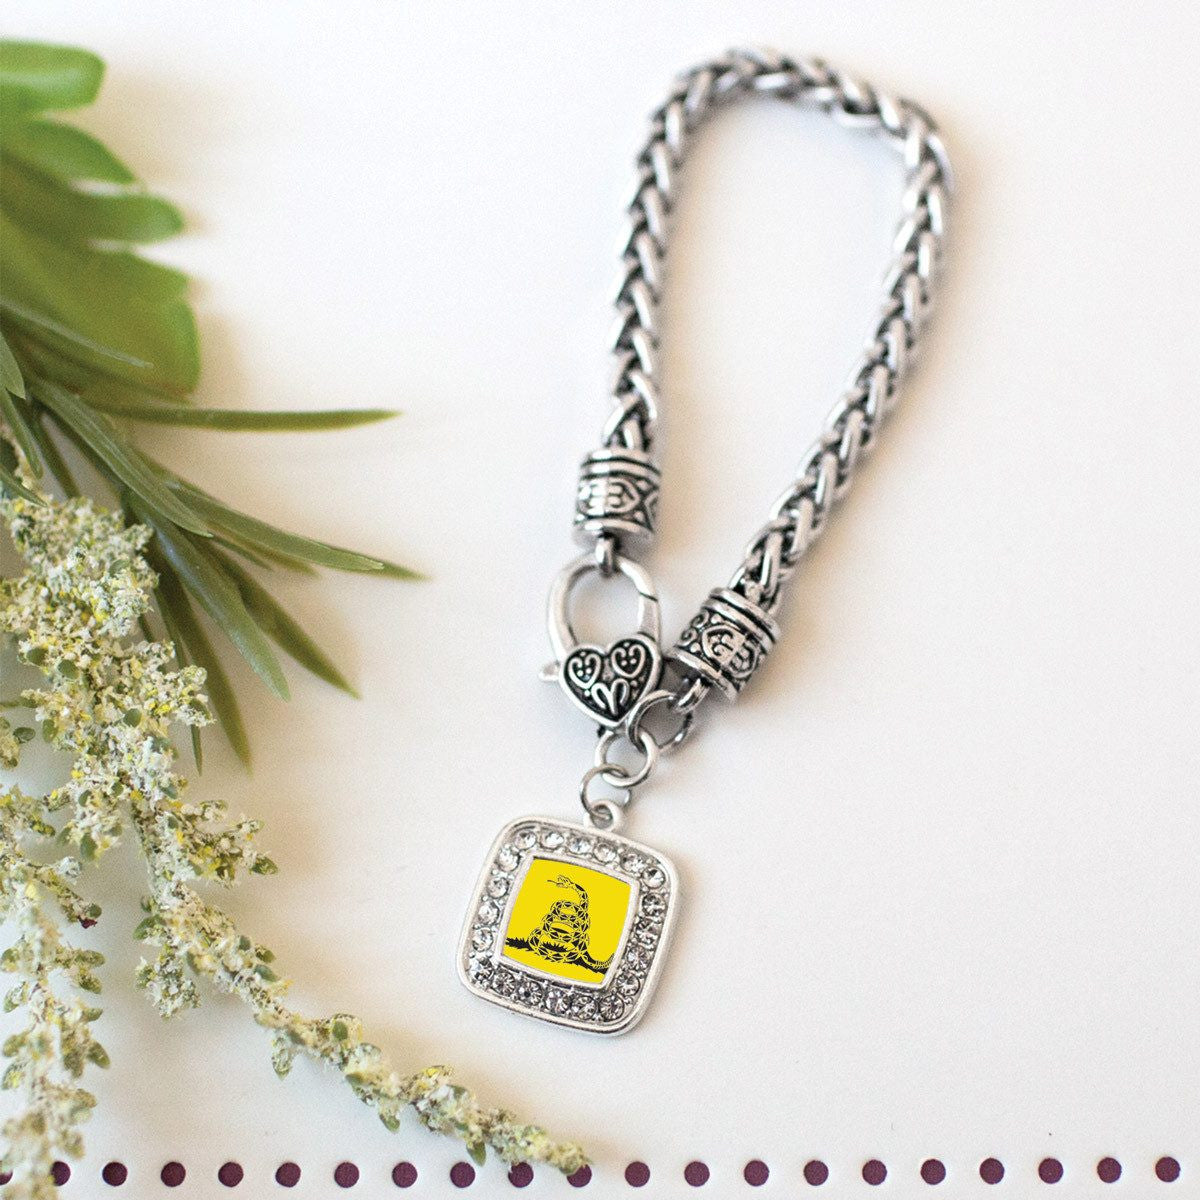 Don't Tread on Me Charm Jewelry Collection